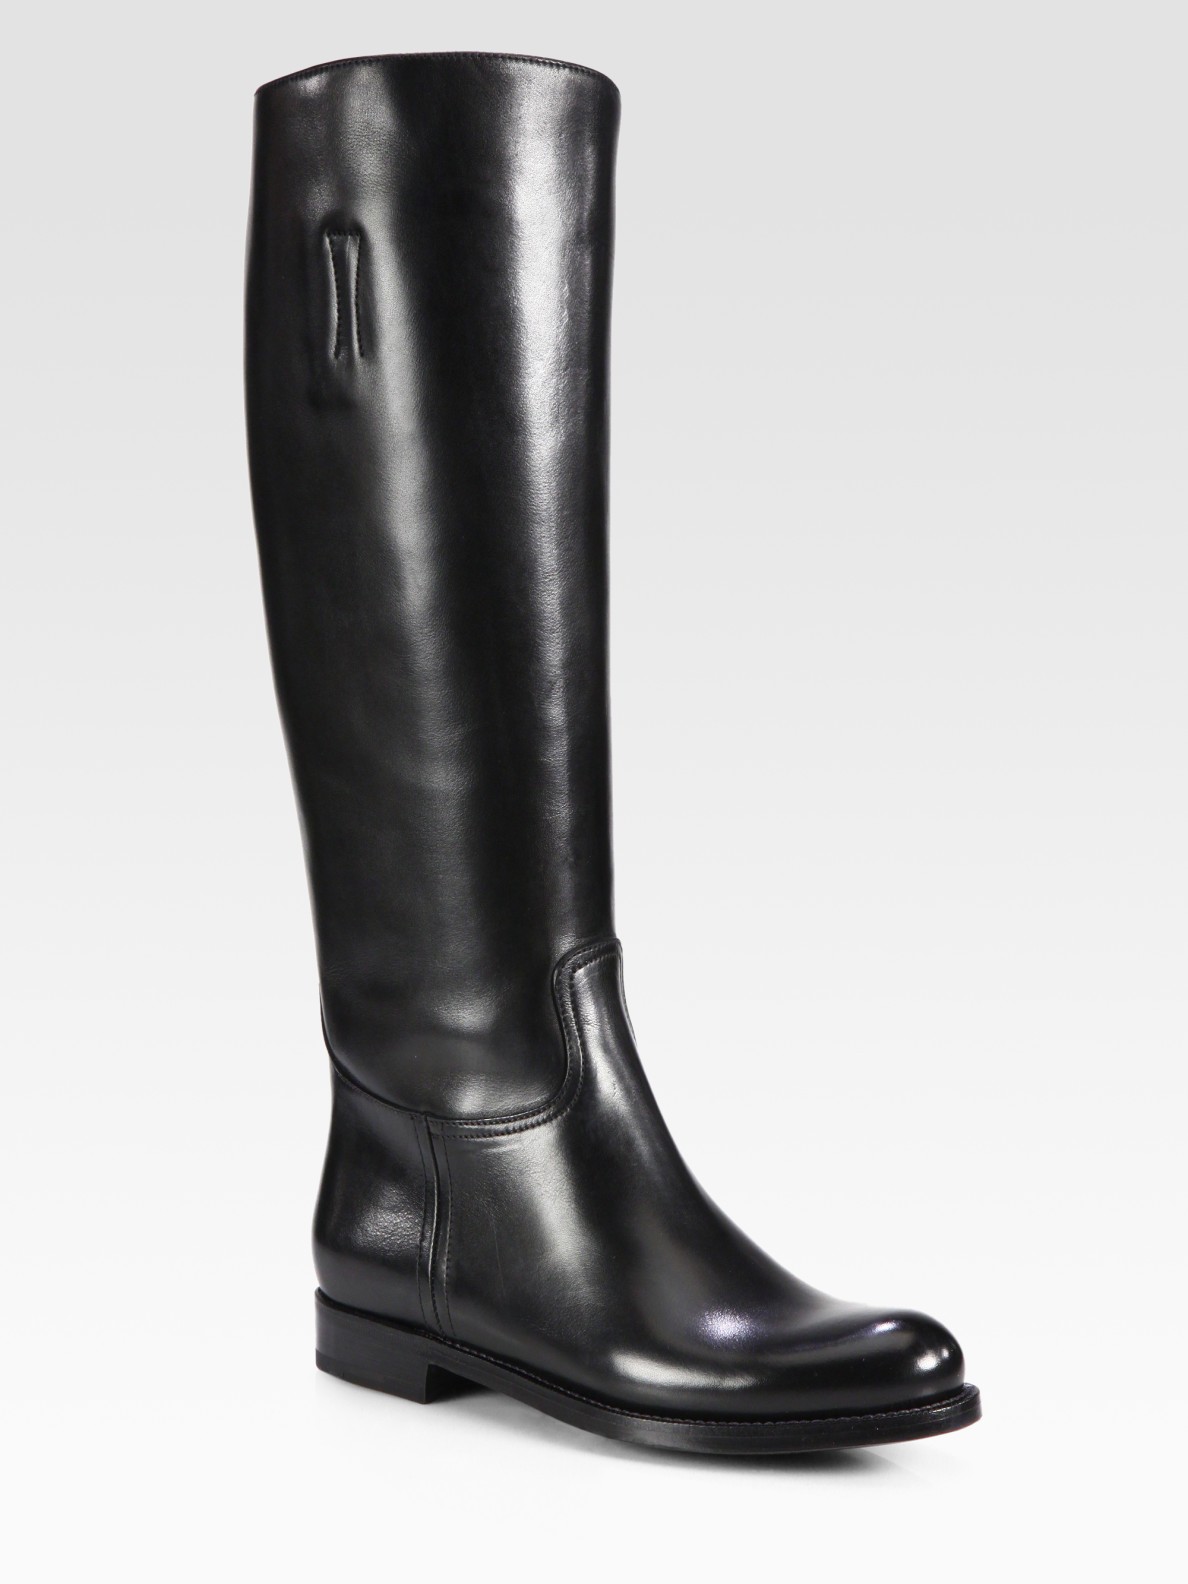 Lyst - Prada Leather Riding Boots in Black